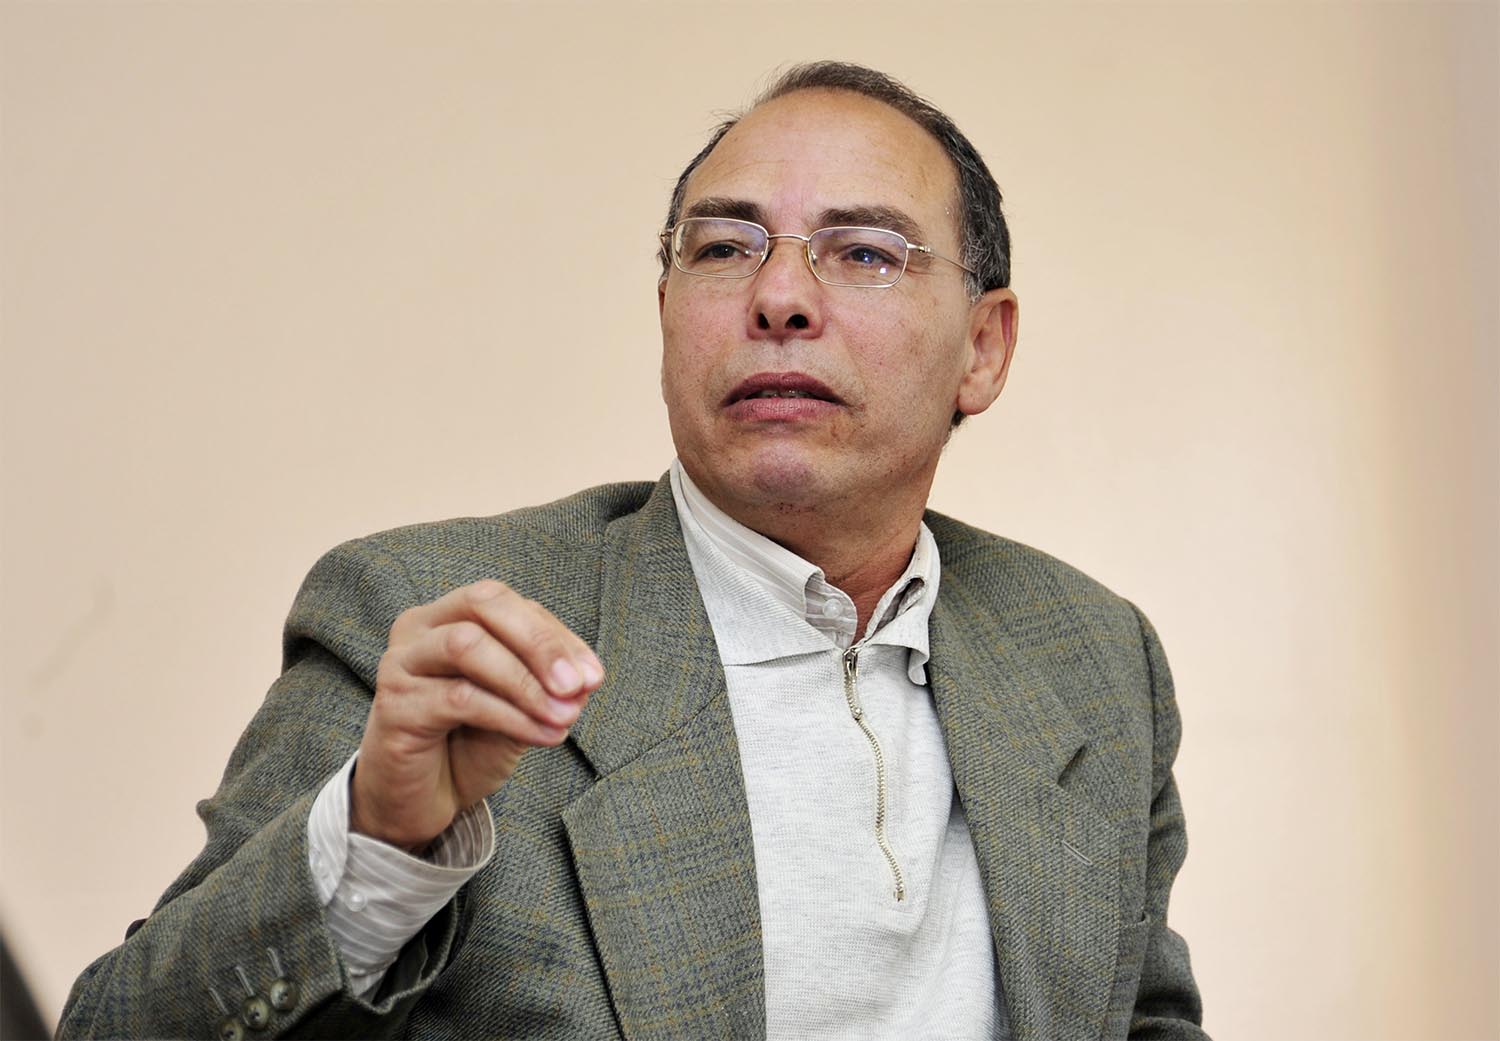 Monjib is professor of political history and African studies at the University of Rabat